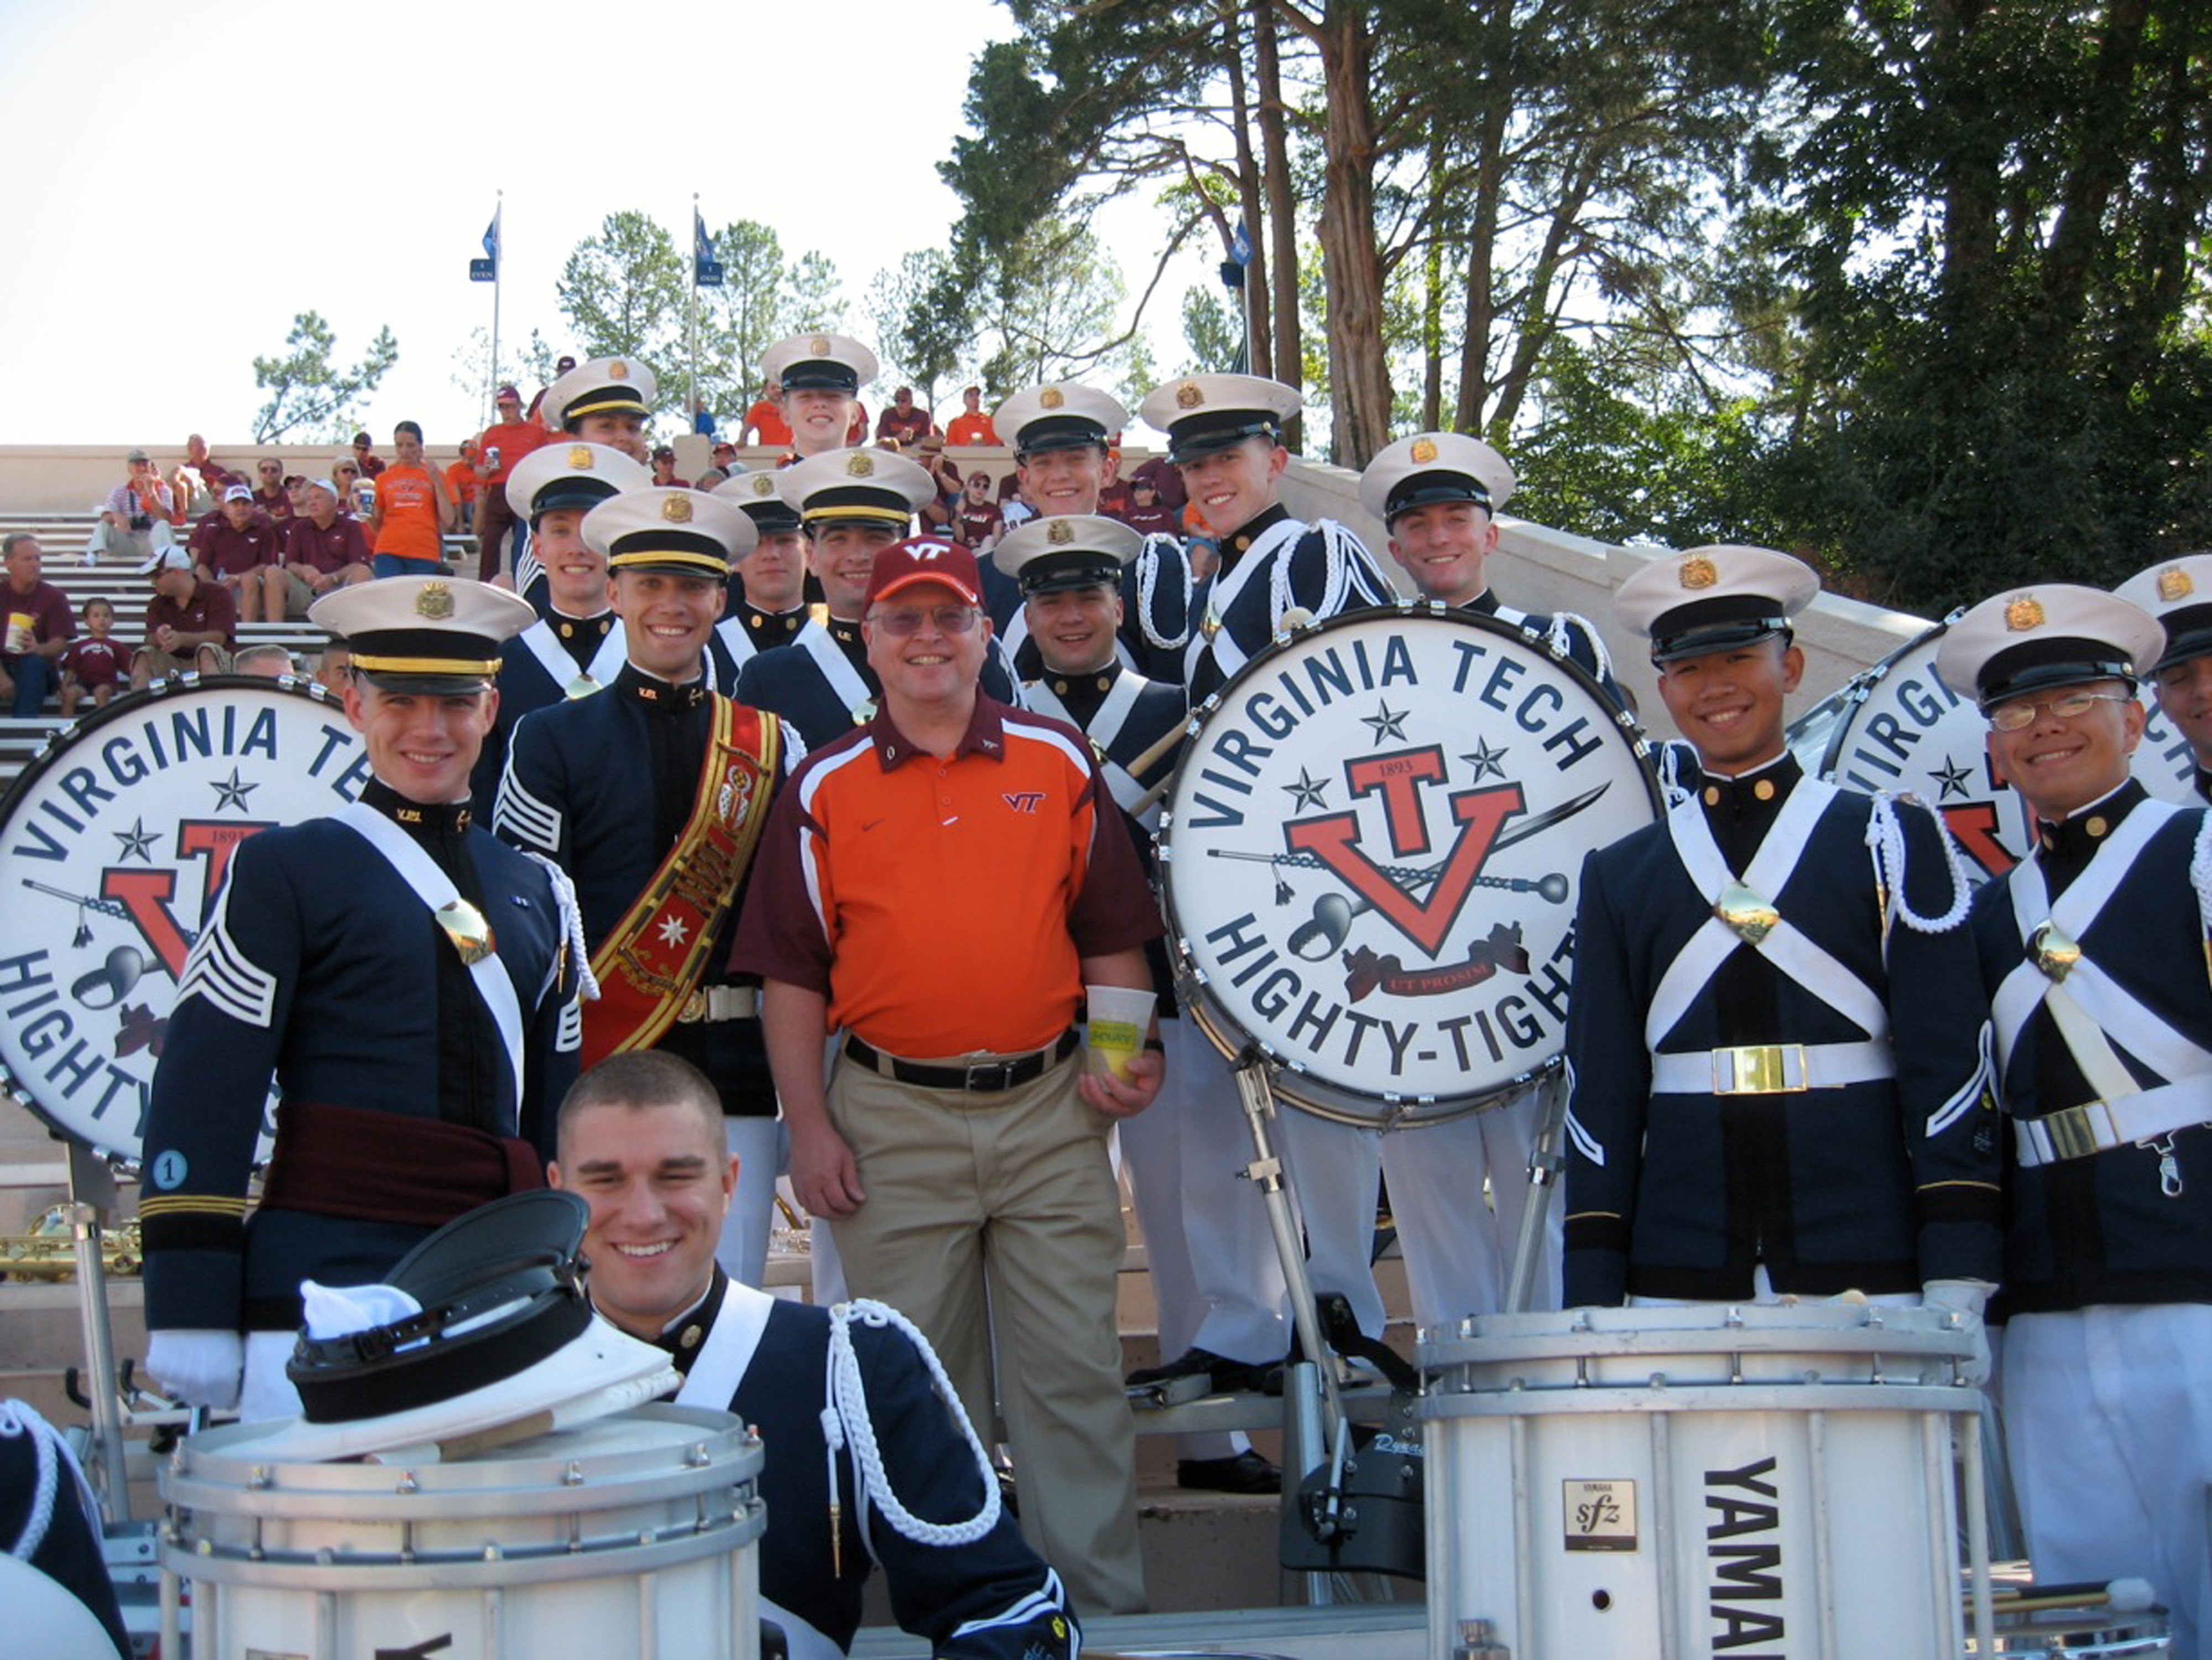 Members of the Highty-Tighties, the Regimental Band, with Assistant Director of Admissions retired Lt. Col. Gary Jackson, U.S. Army, Virginia Tech Corps of Cadets and Highty-Tighty Class of 1978 shown at the Duke game in 2009